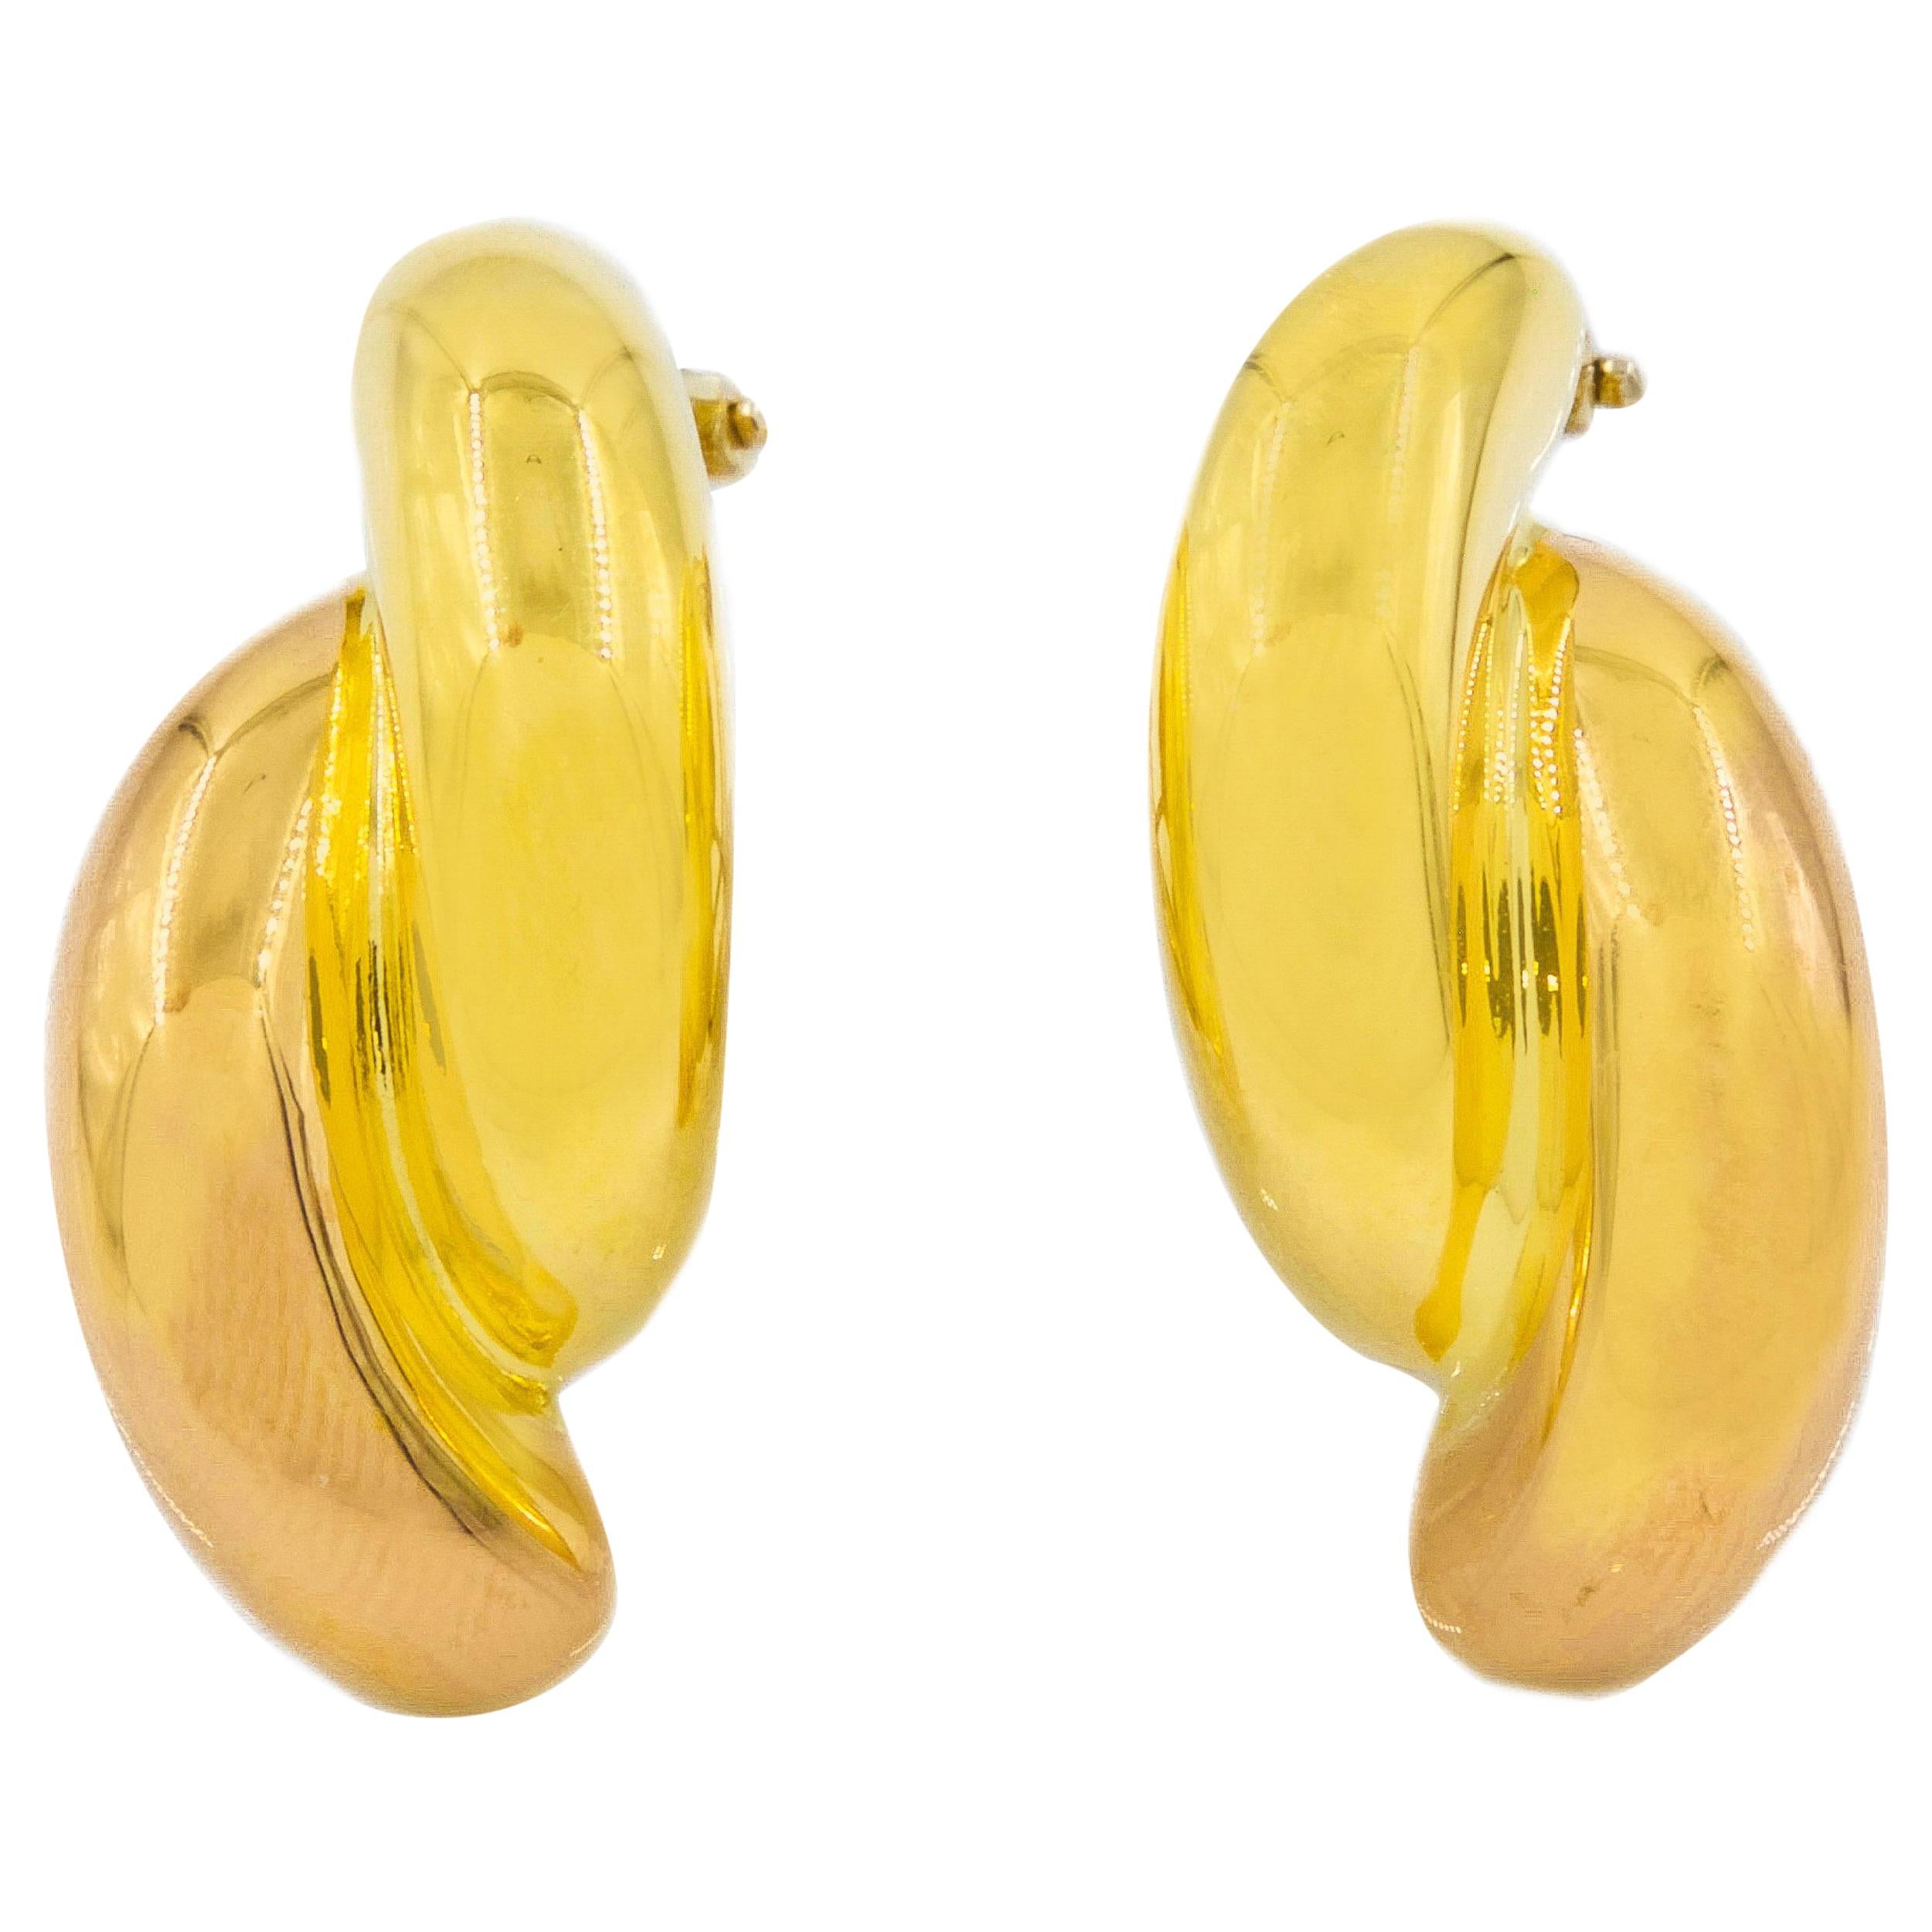 Pair of Pink and Yellow 18k Gold Half-Tube Earrings by Nicolis Cola